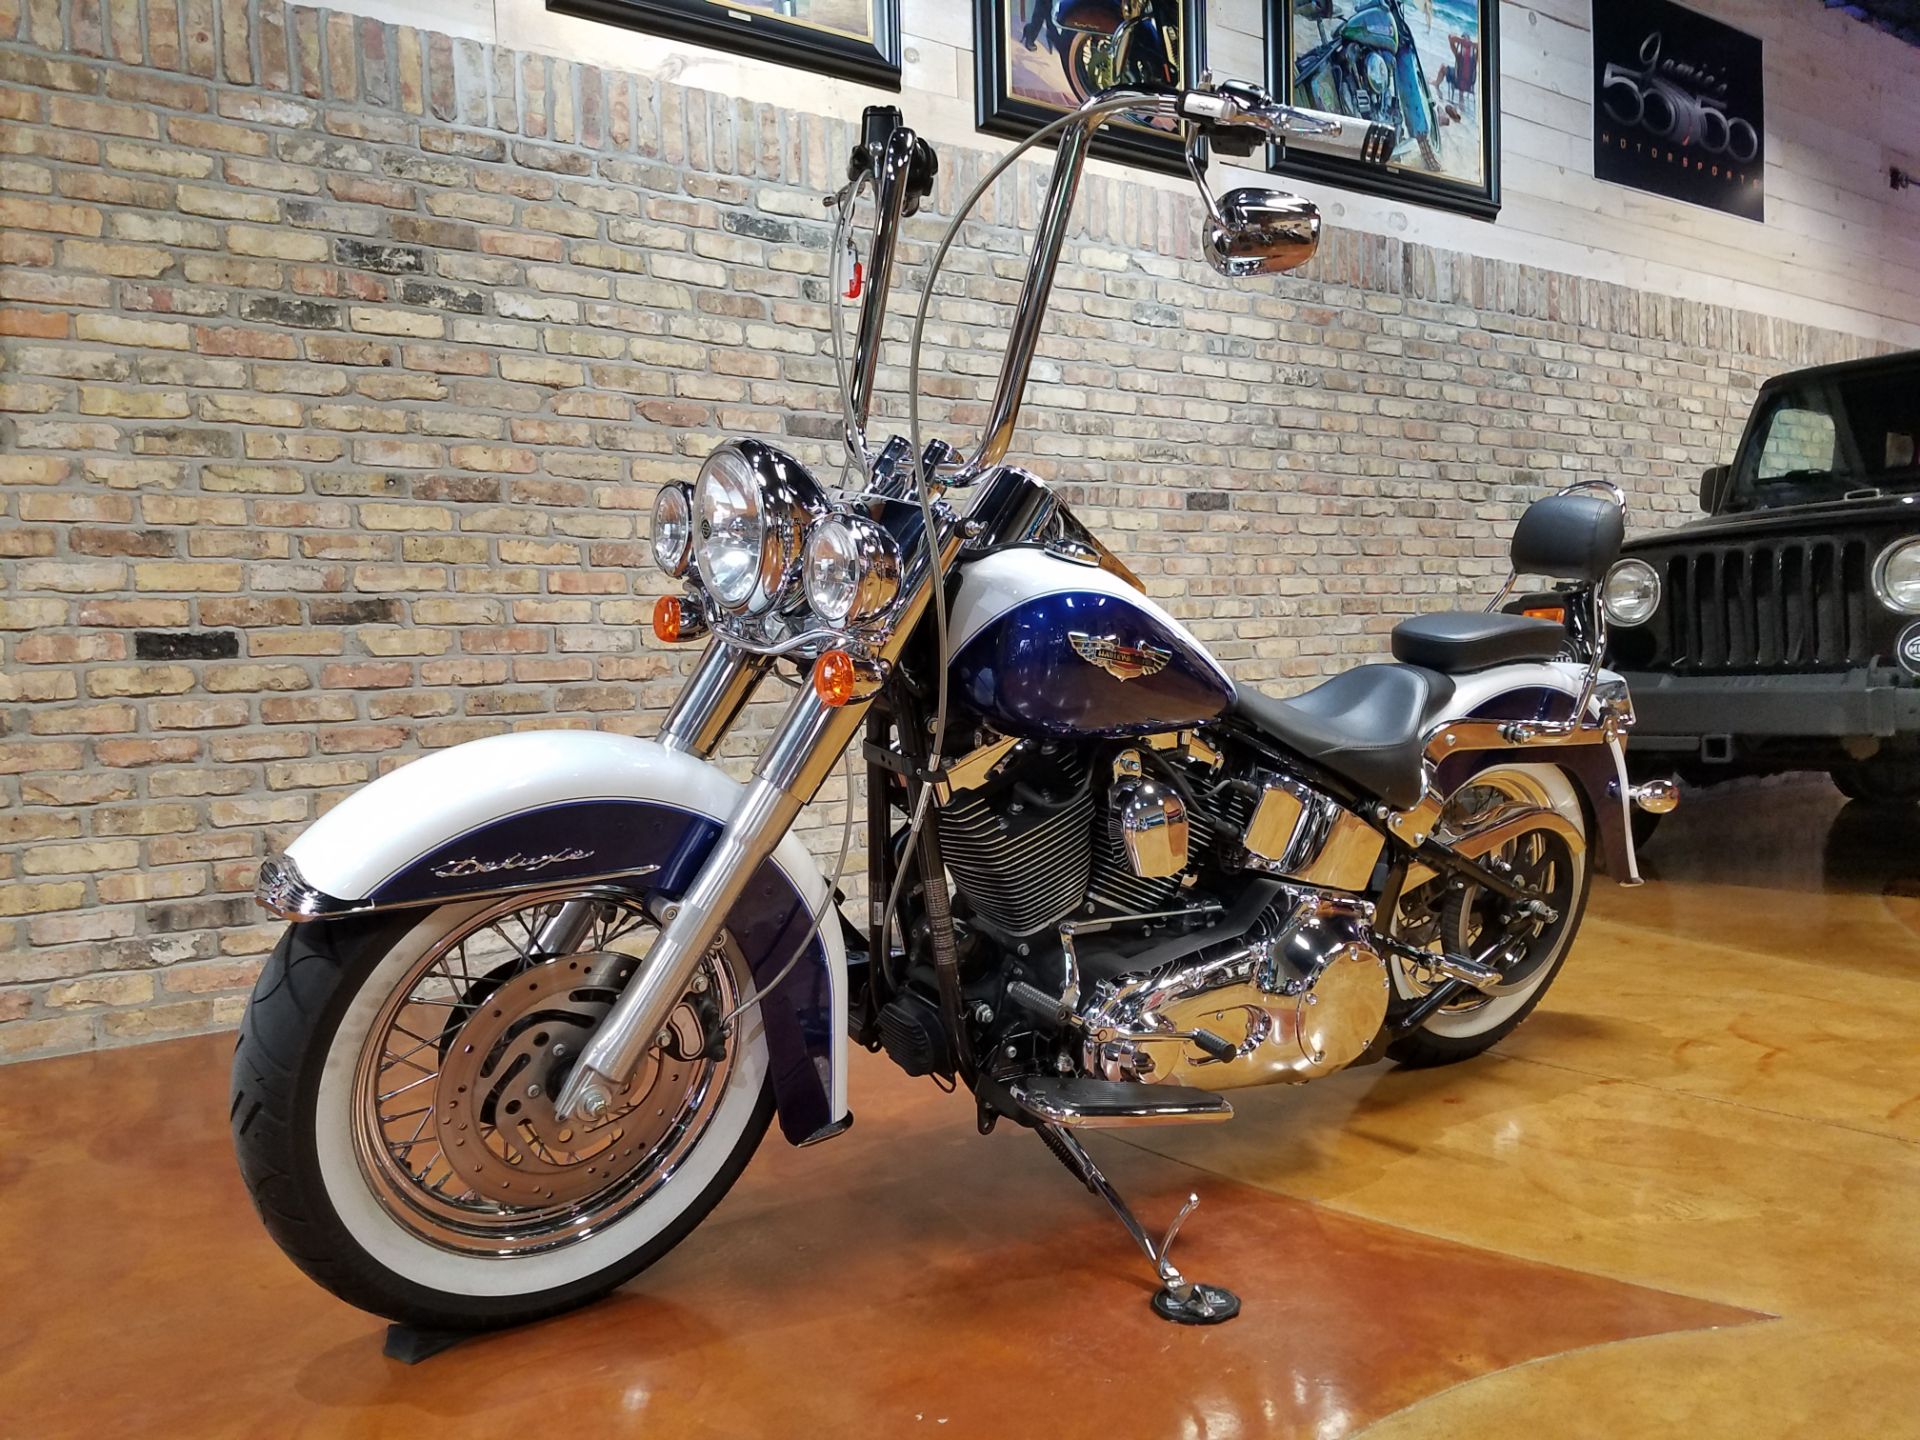 Used 2006 Harley Davidson Softail Deluxe Motorcycles In Big Bend Wi 4397 Two Tone Glacier White Deep Cobalt